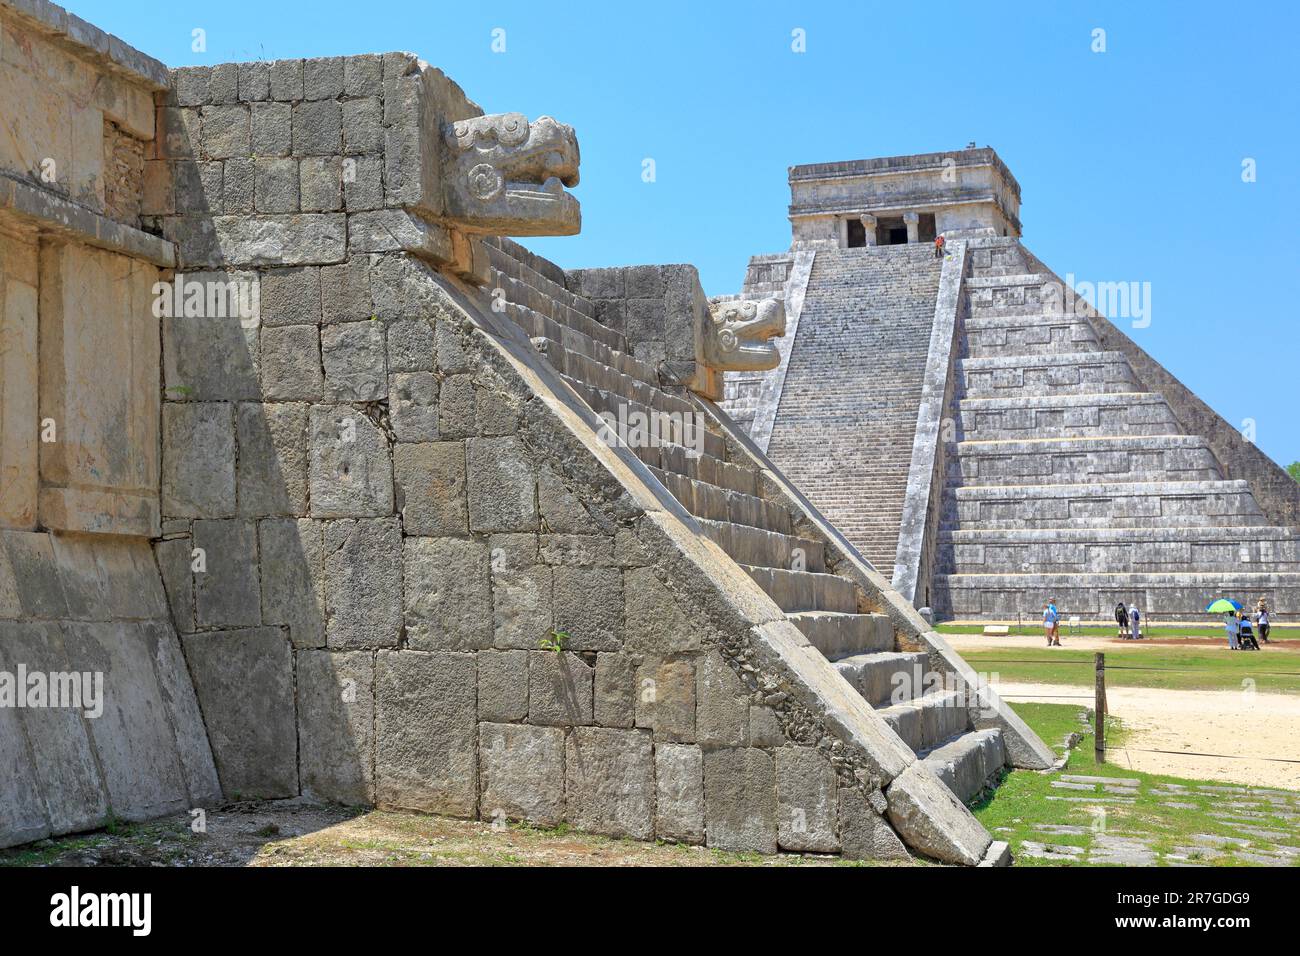 The Platform of the Eagles and Jaguars and the Castle, El Castillo or Pyramid of Kukulcan at Chichen Itza, Yucatan, Yucatan Peninsular, Mexico. Stock Photo